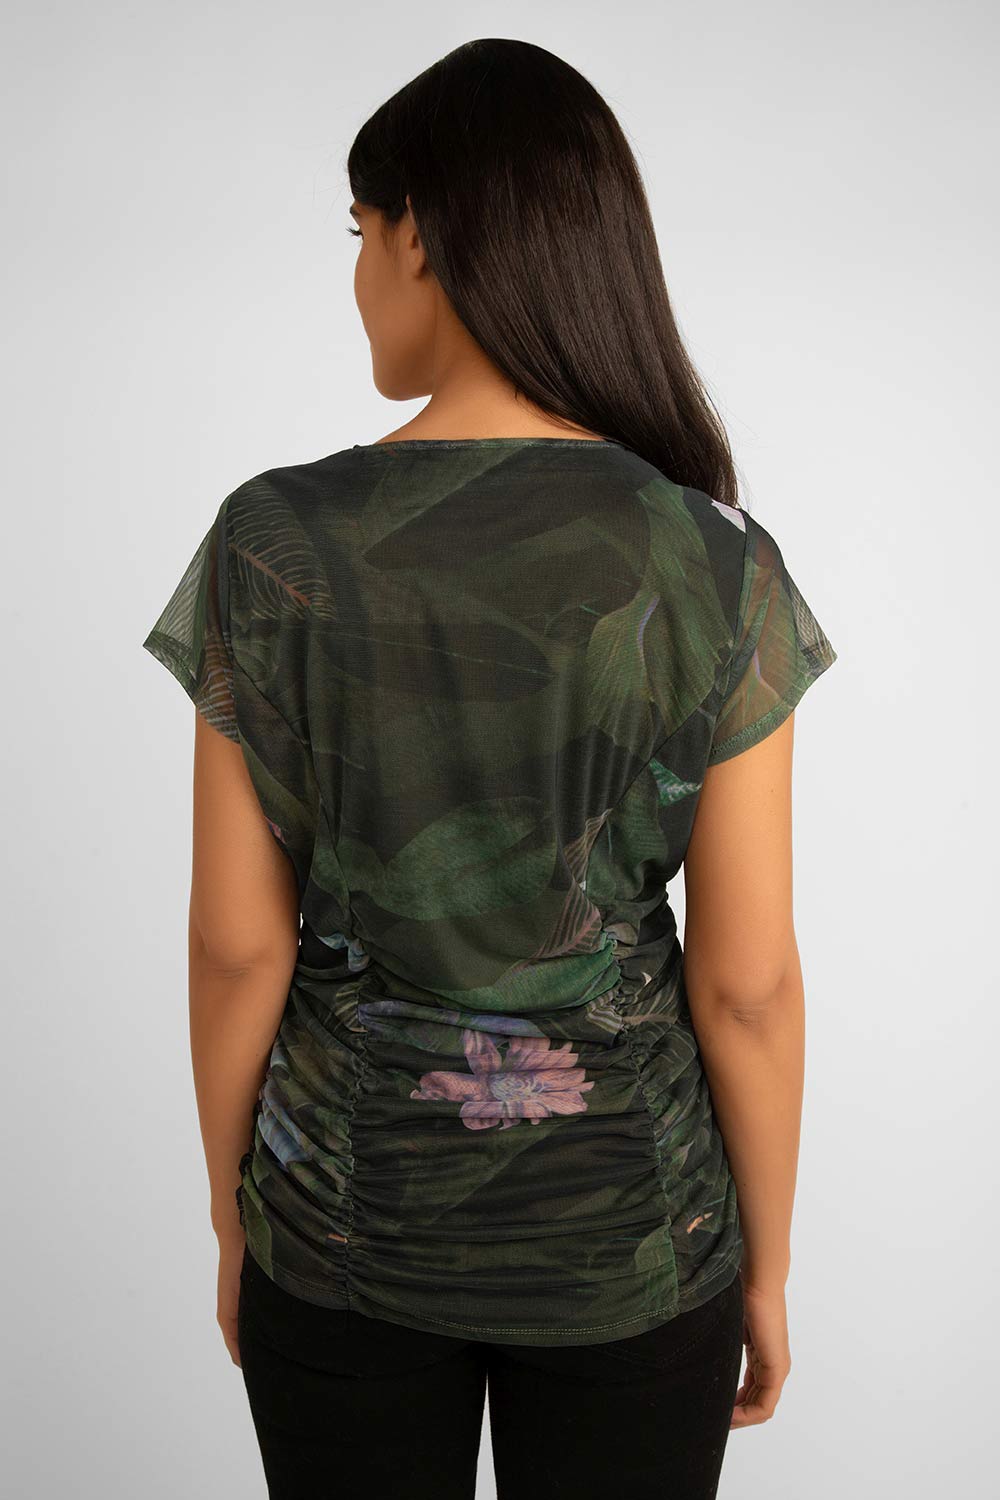 Back view of Picadily (JN708AK) Women's Short Sleeve Ruched Mesh Top in a Dark Green Floral Print